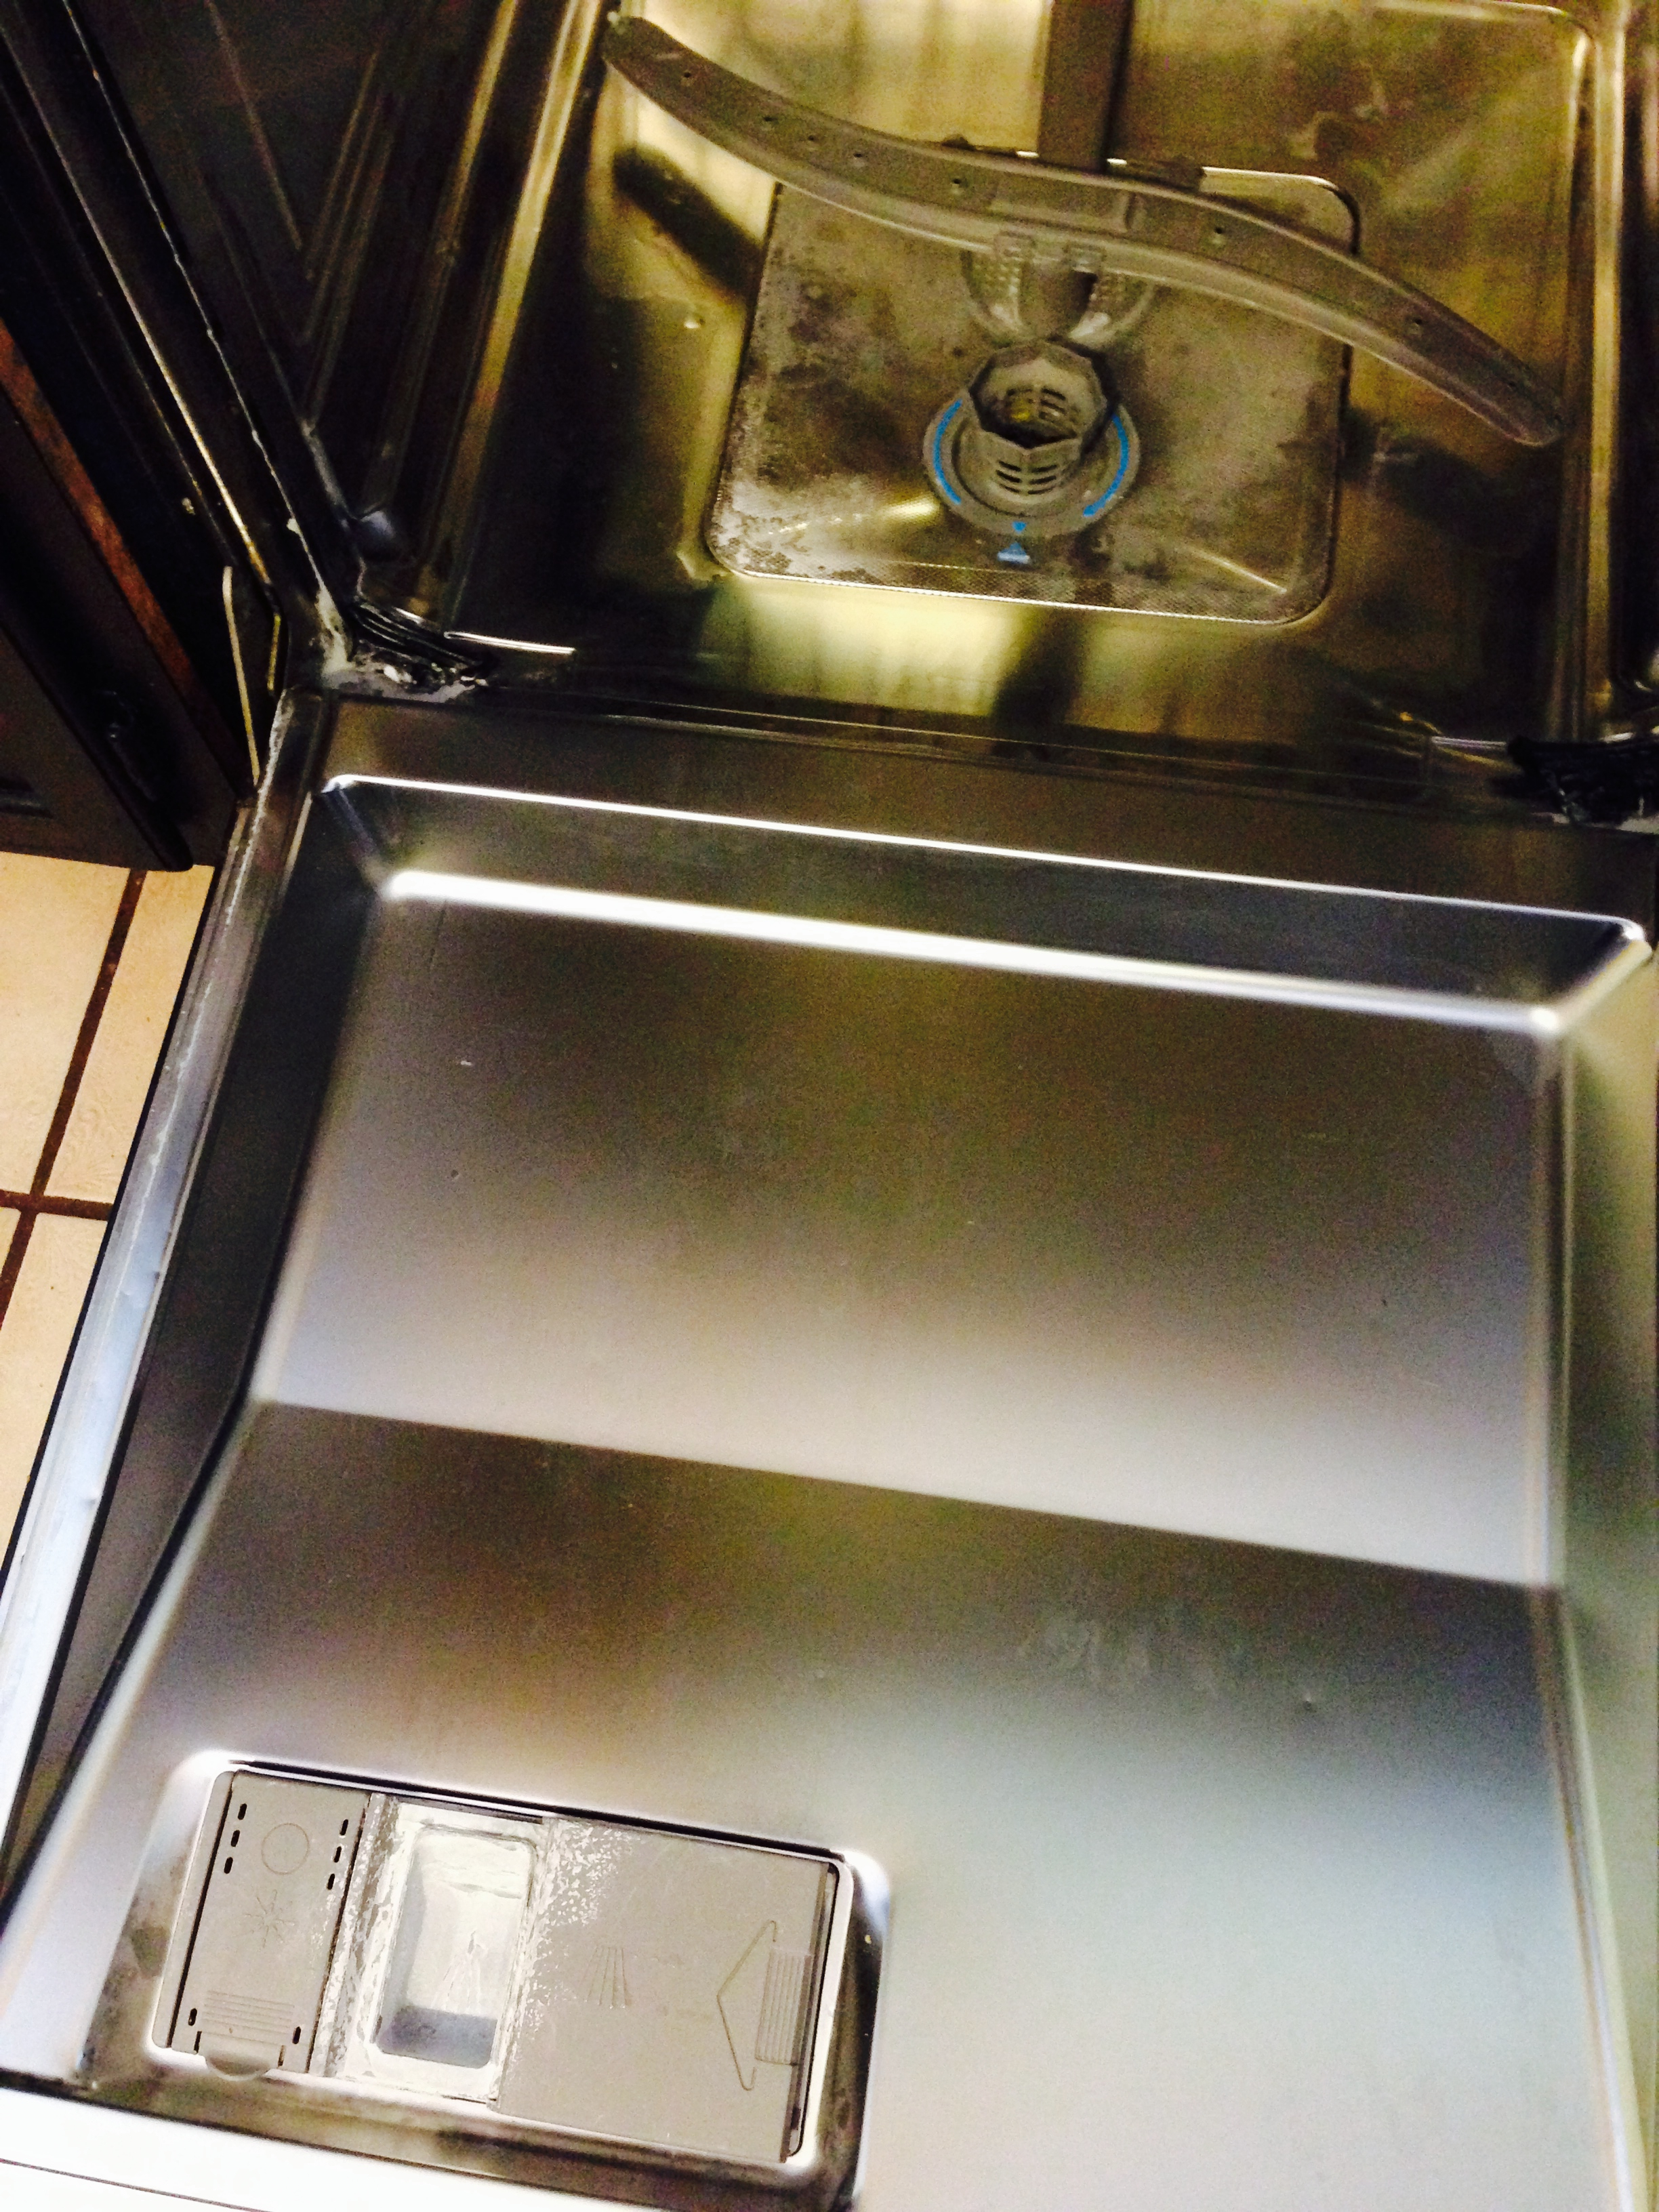 Cleaning Hard Water Deposits From Bosch Stainless Steel Dishwasher